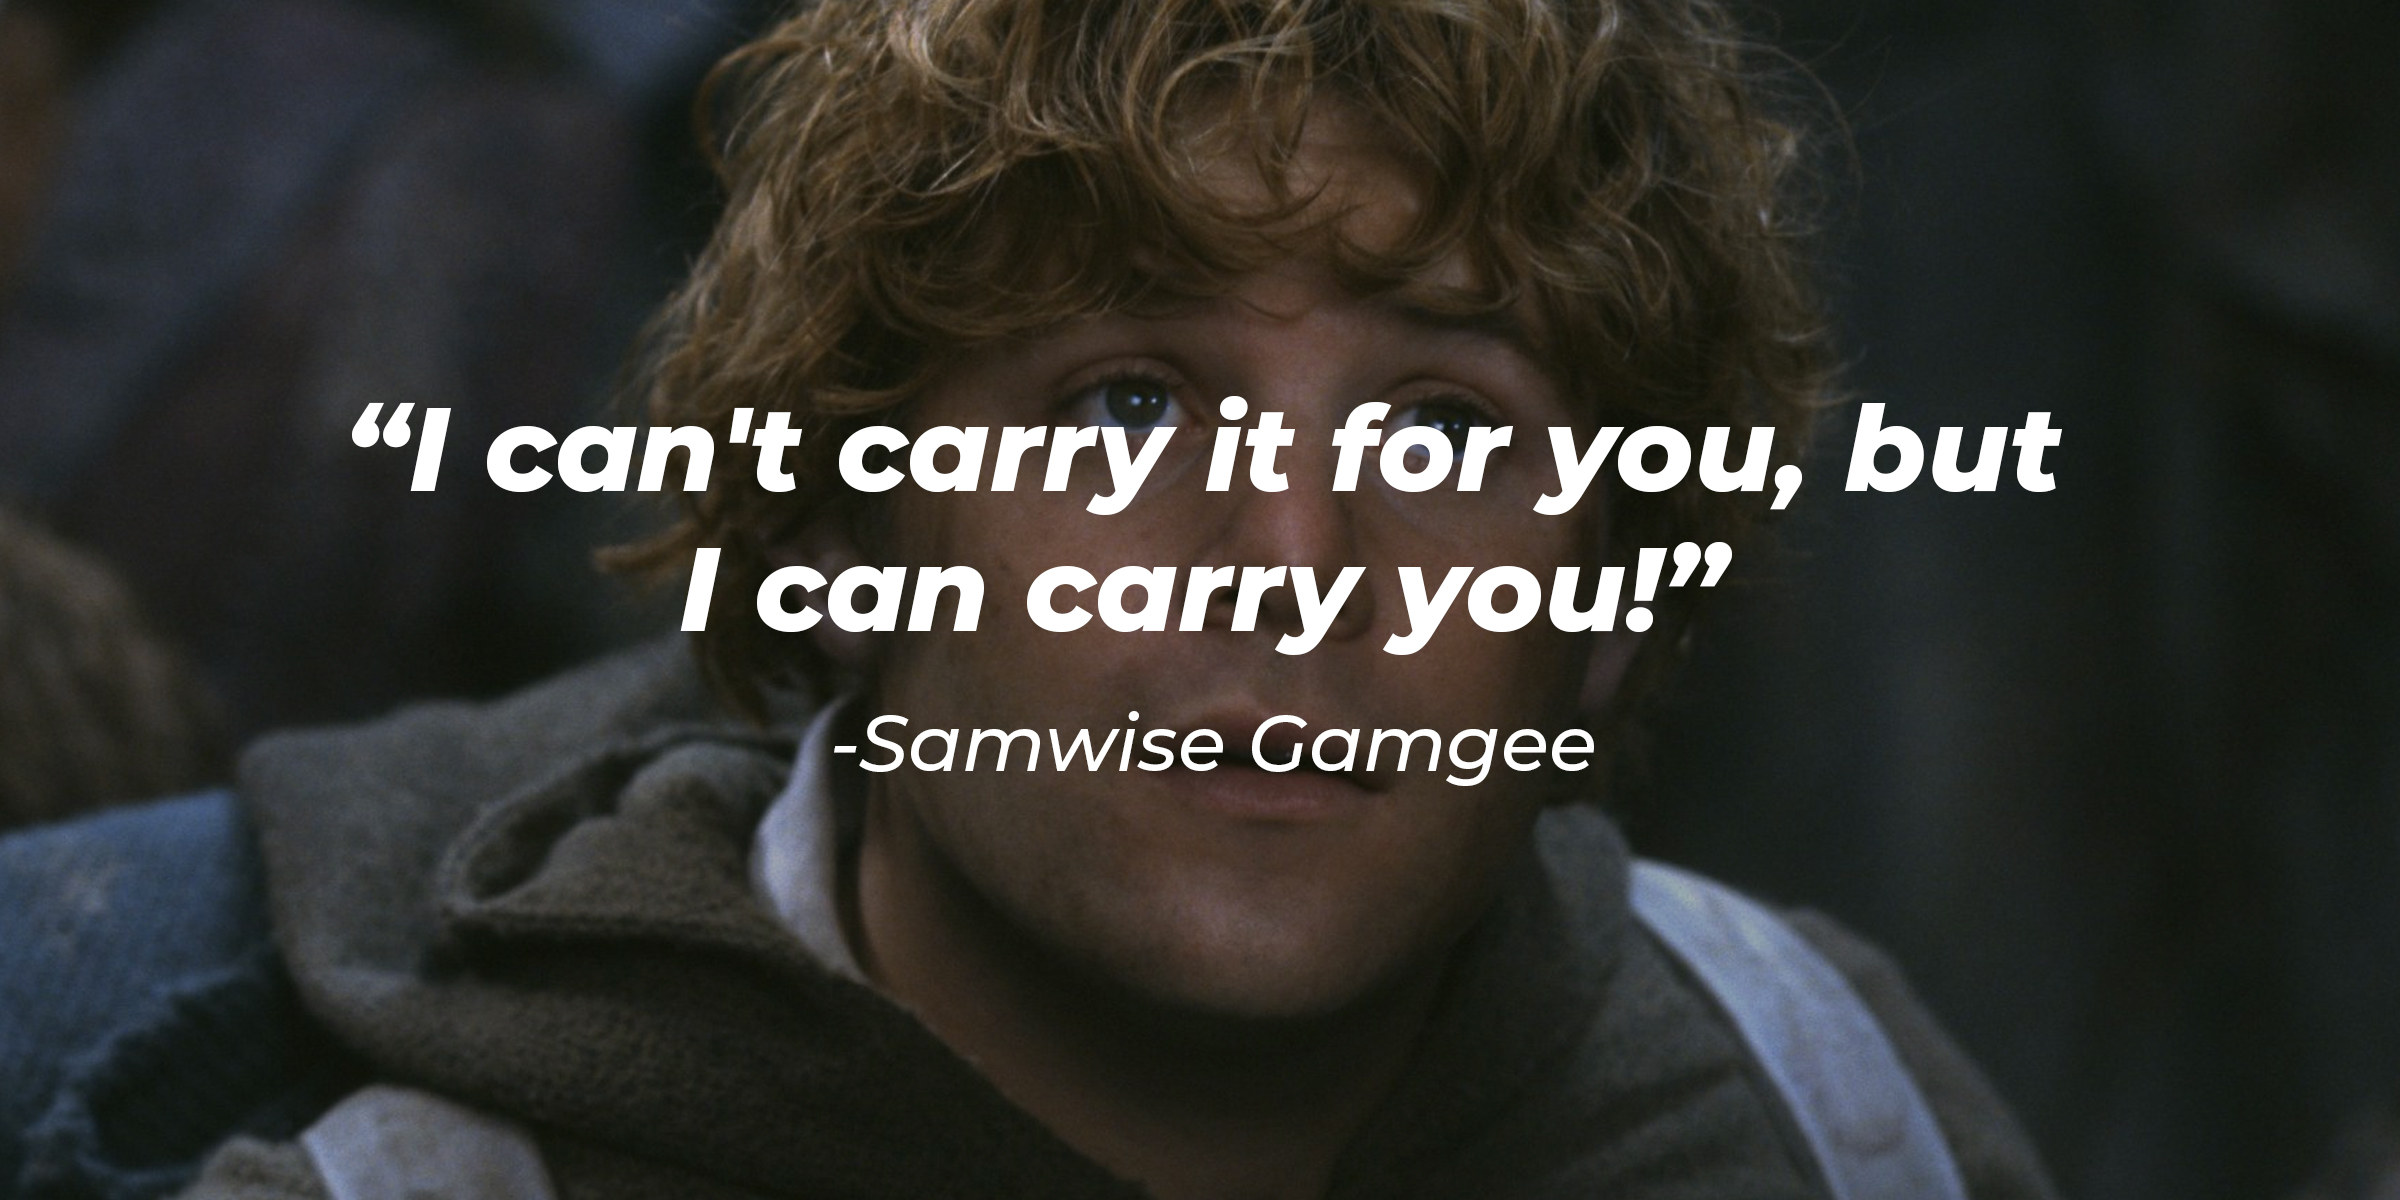 Samwise Gamgee with his quote: "I can't carry it for you, but I can carry you!" | Source: Facebook/lordoftheringstrilogy